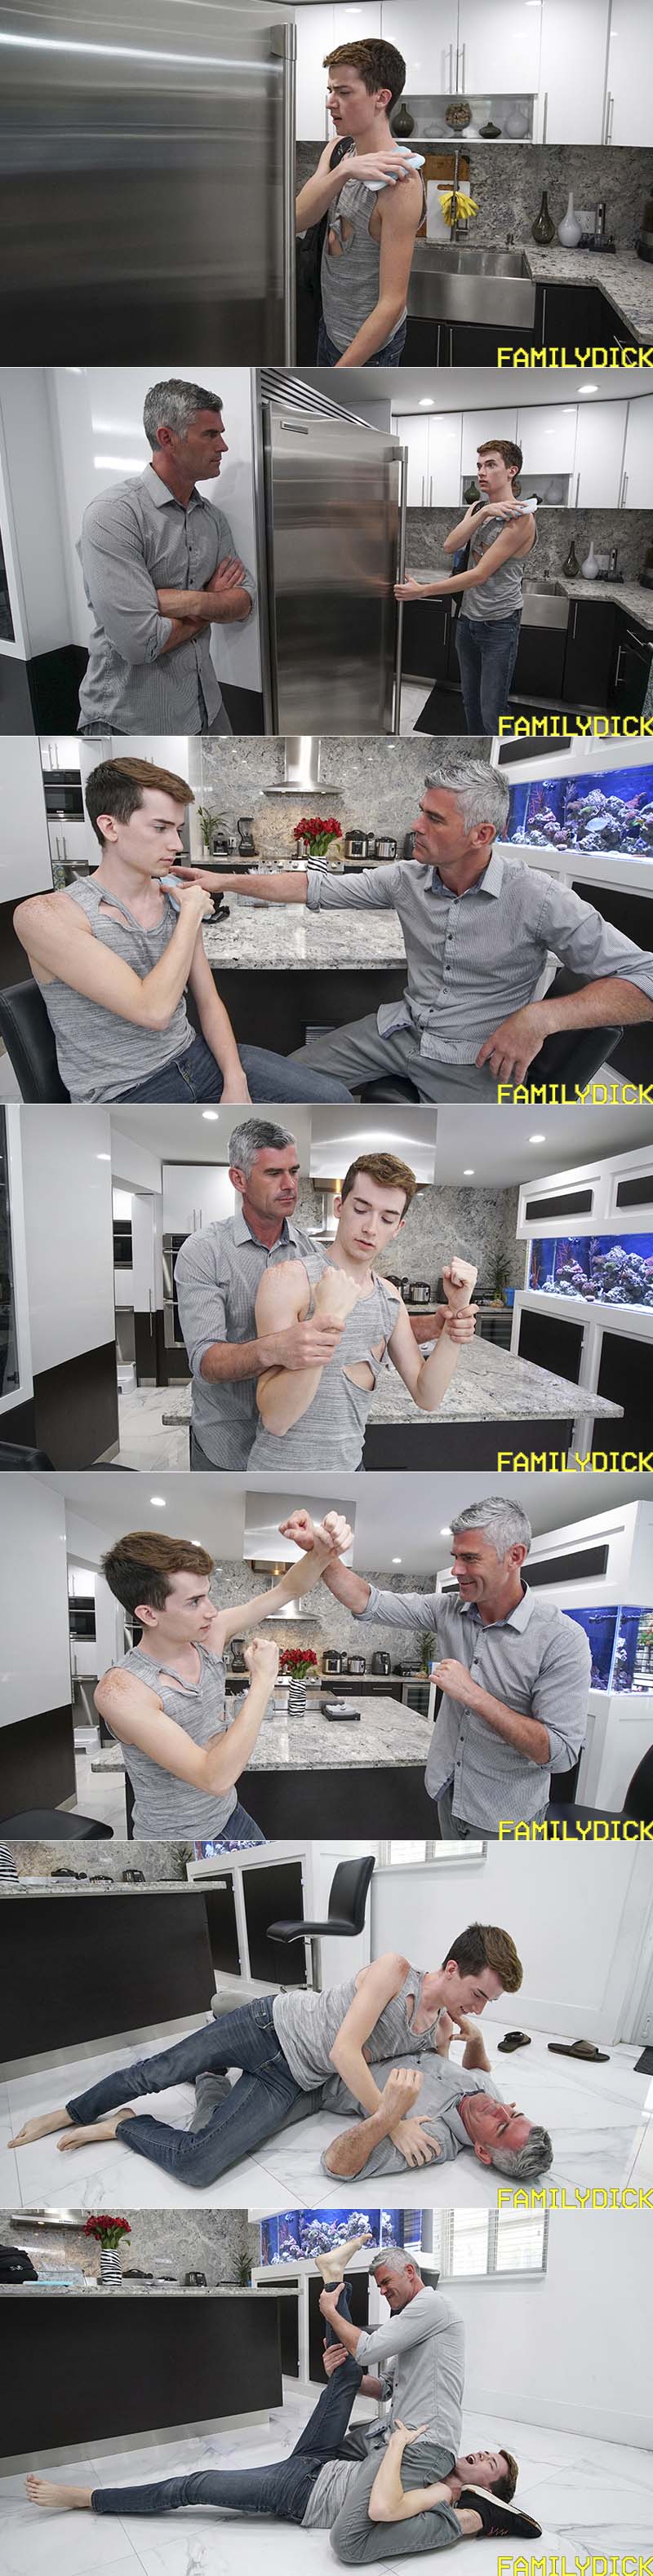 Family Man: The Bully, Chapter One (with Alex Meyer and Bill) at FamilyDick